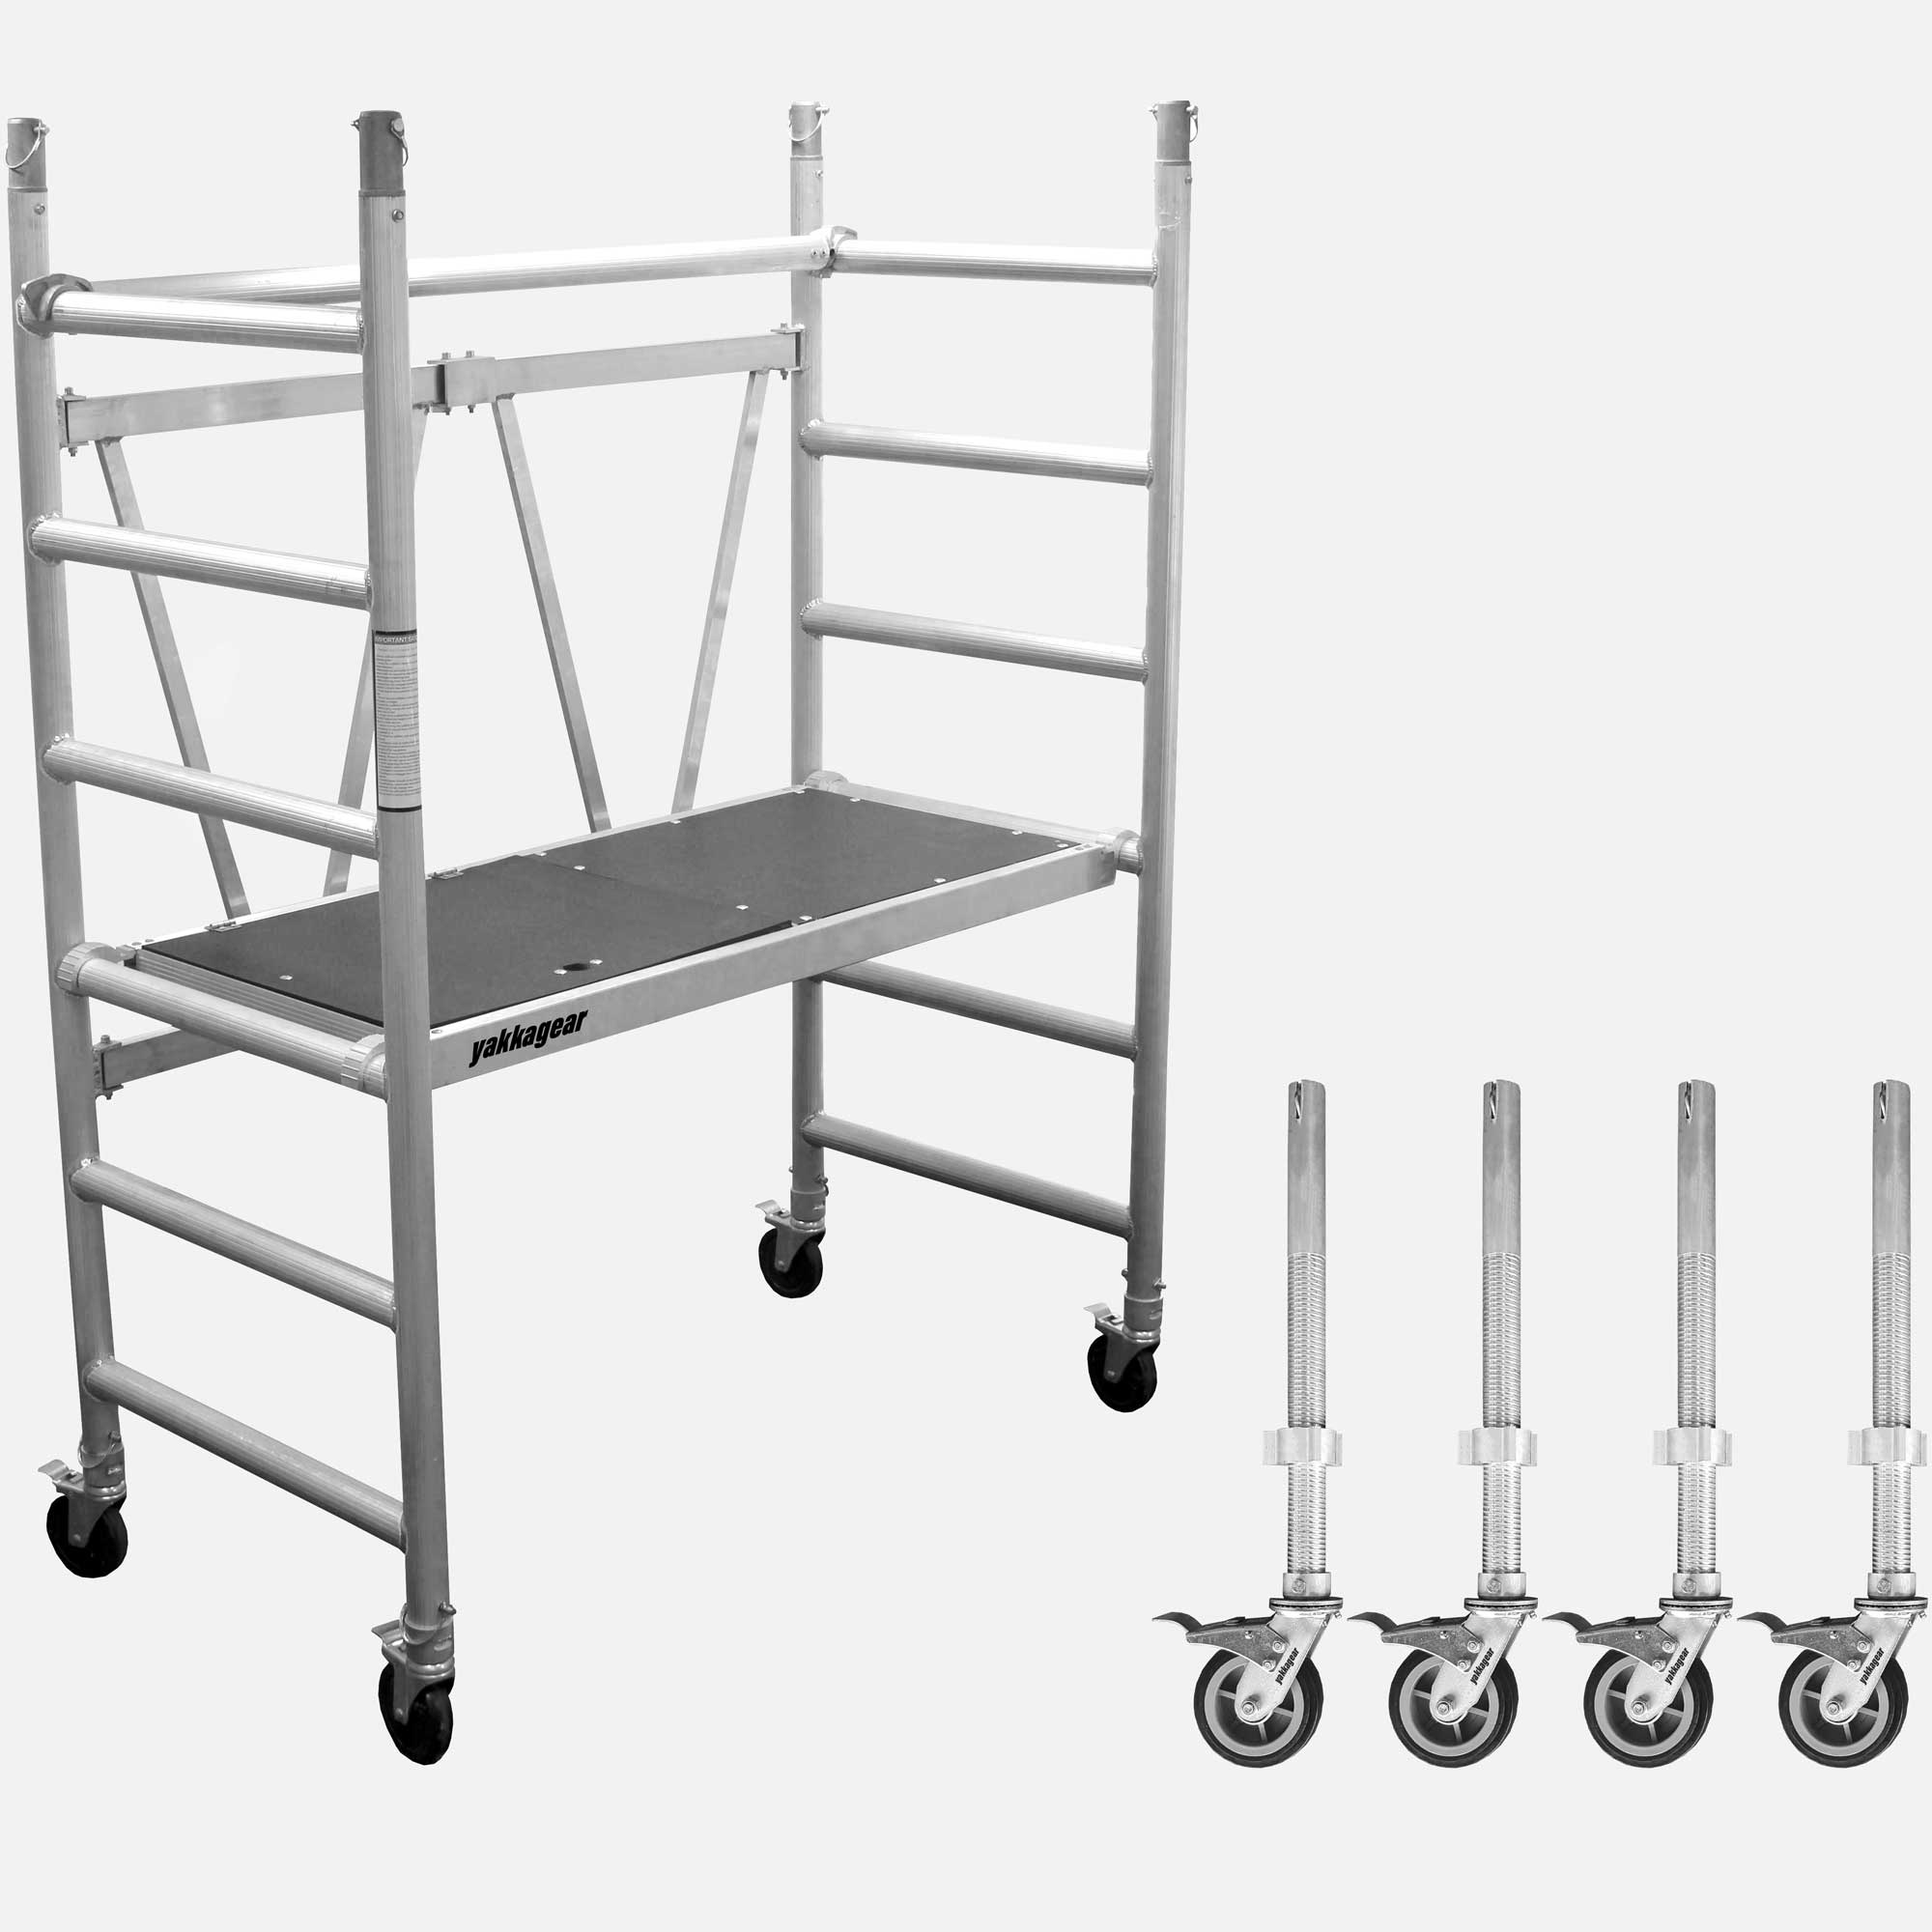 3.6m Reach (1.6m platform) Compact Mobile Scaffolding from Yakka Gear with adjustable wheels from side angle